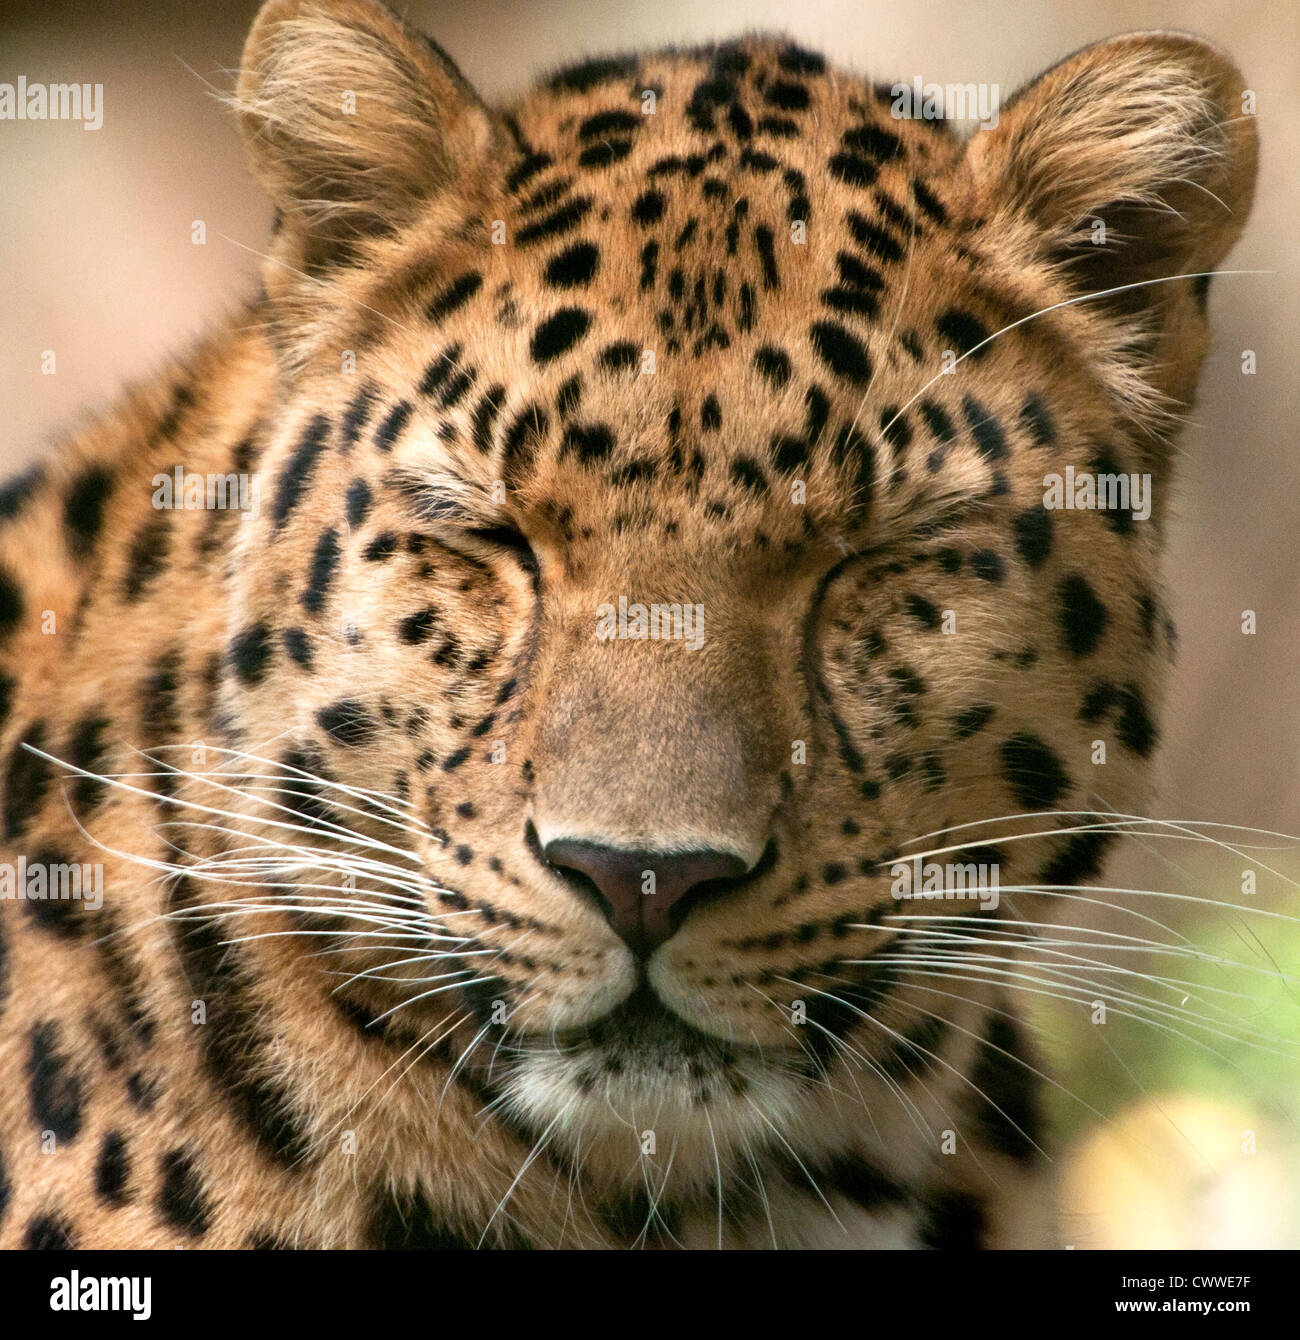 Male Amur leopard with eyes closed Stock Photo: 50347123 - Alamy